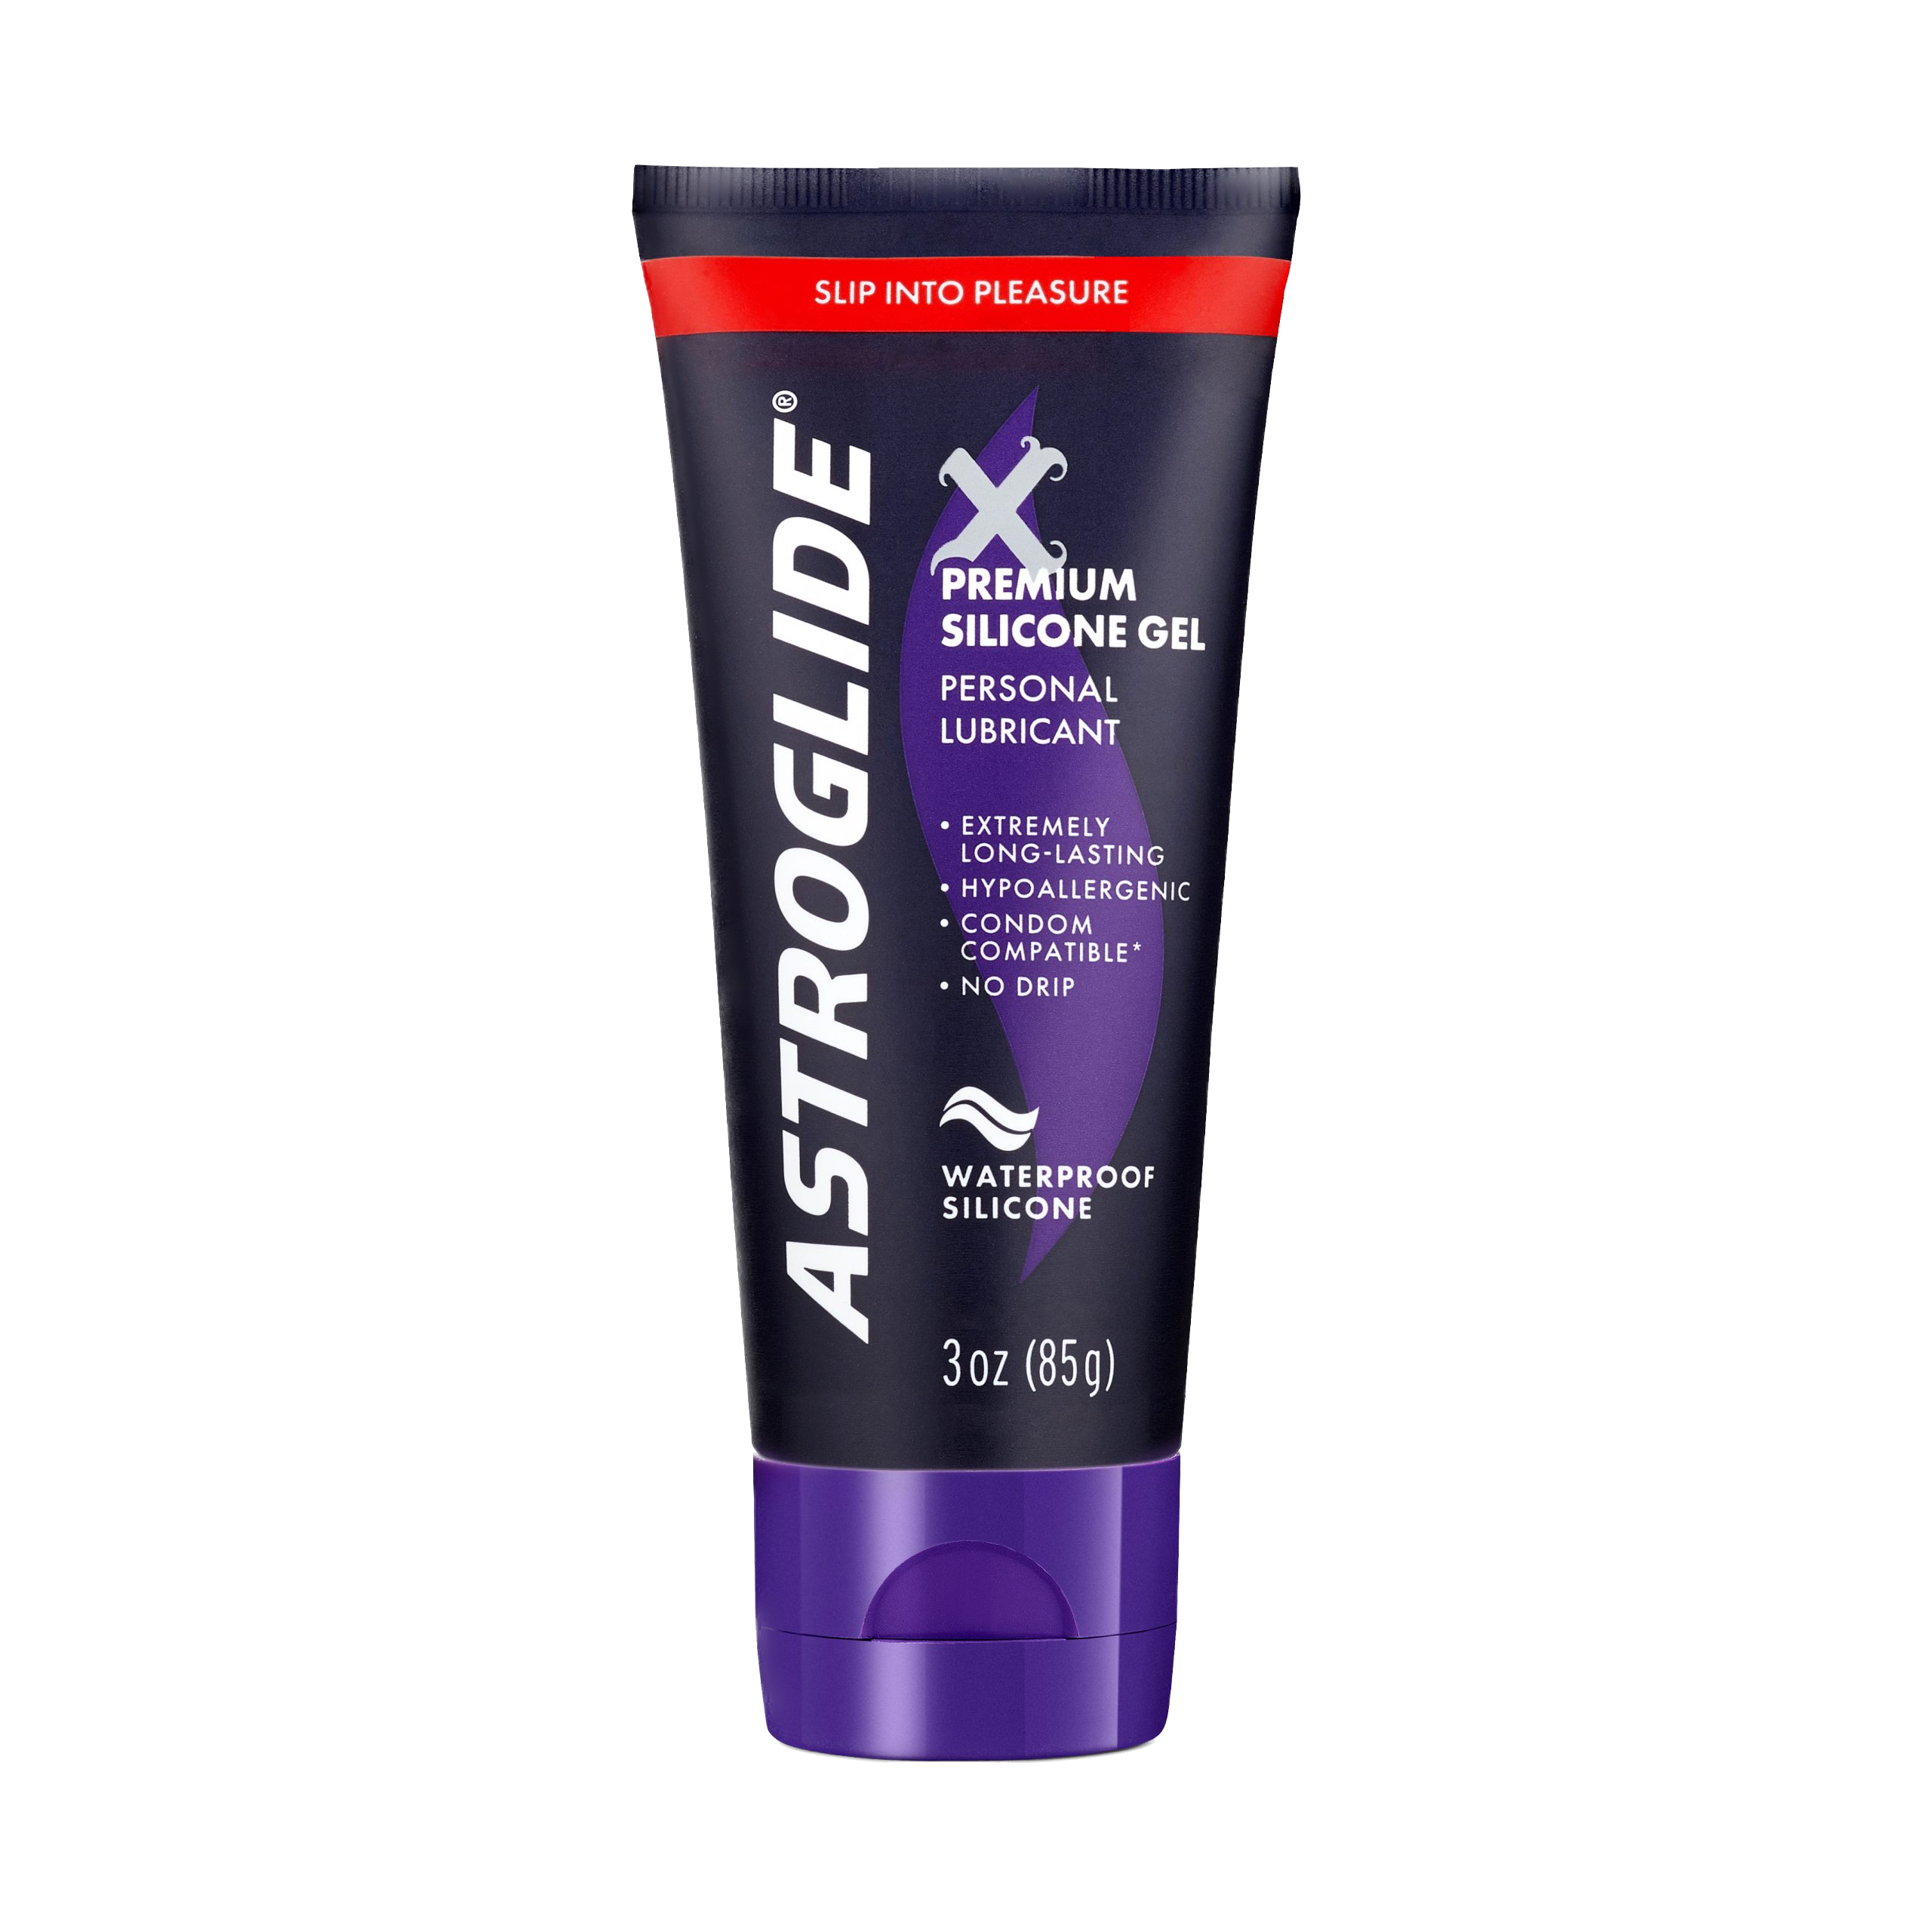 Astroglide Silicone Gel Background Removed image